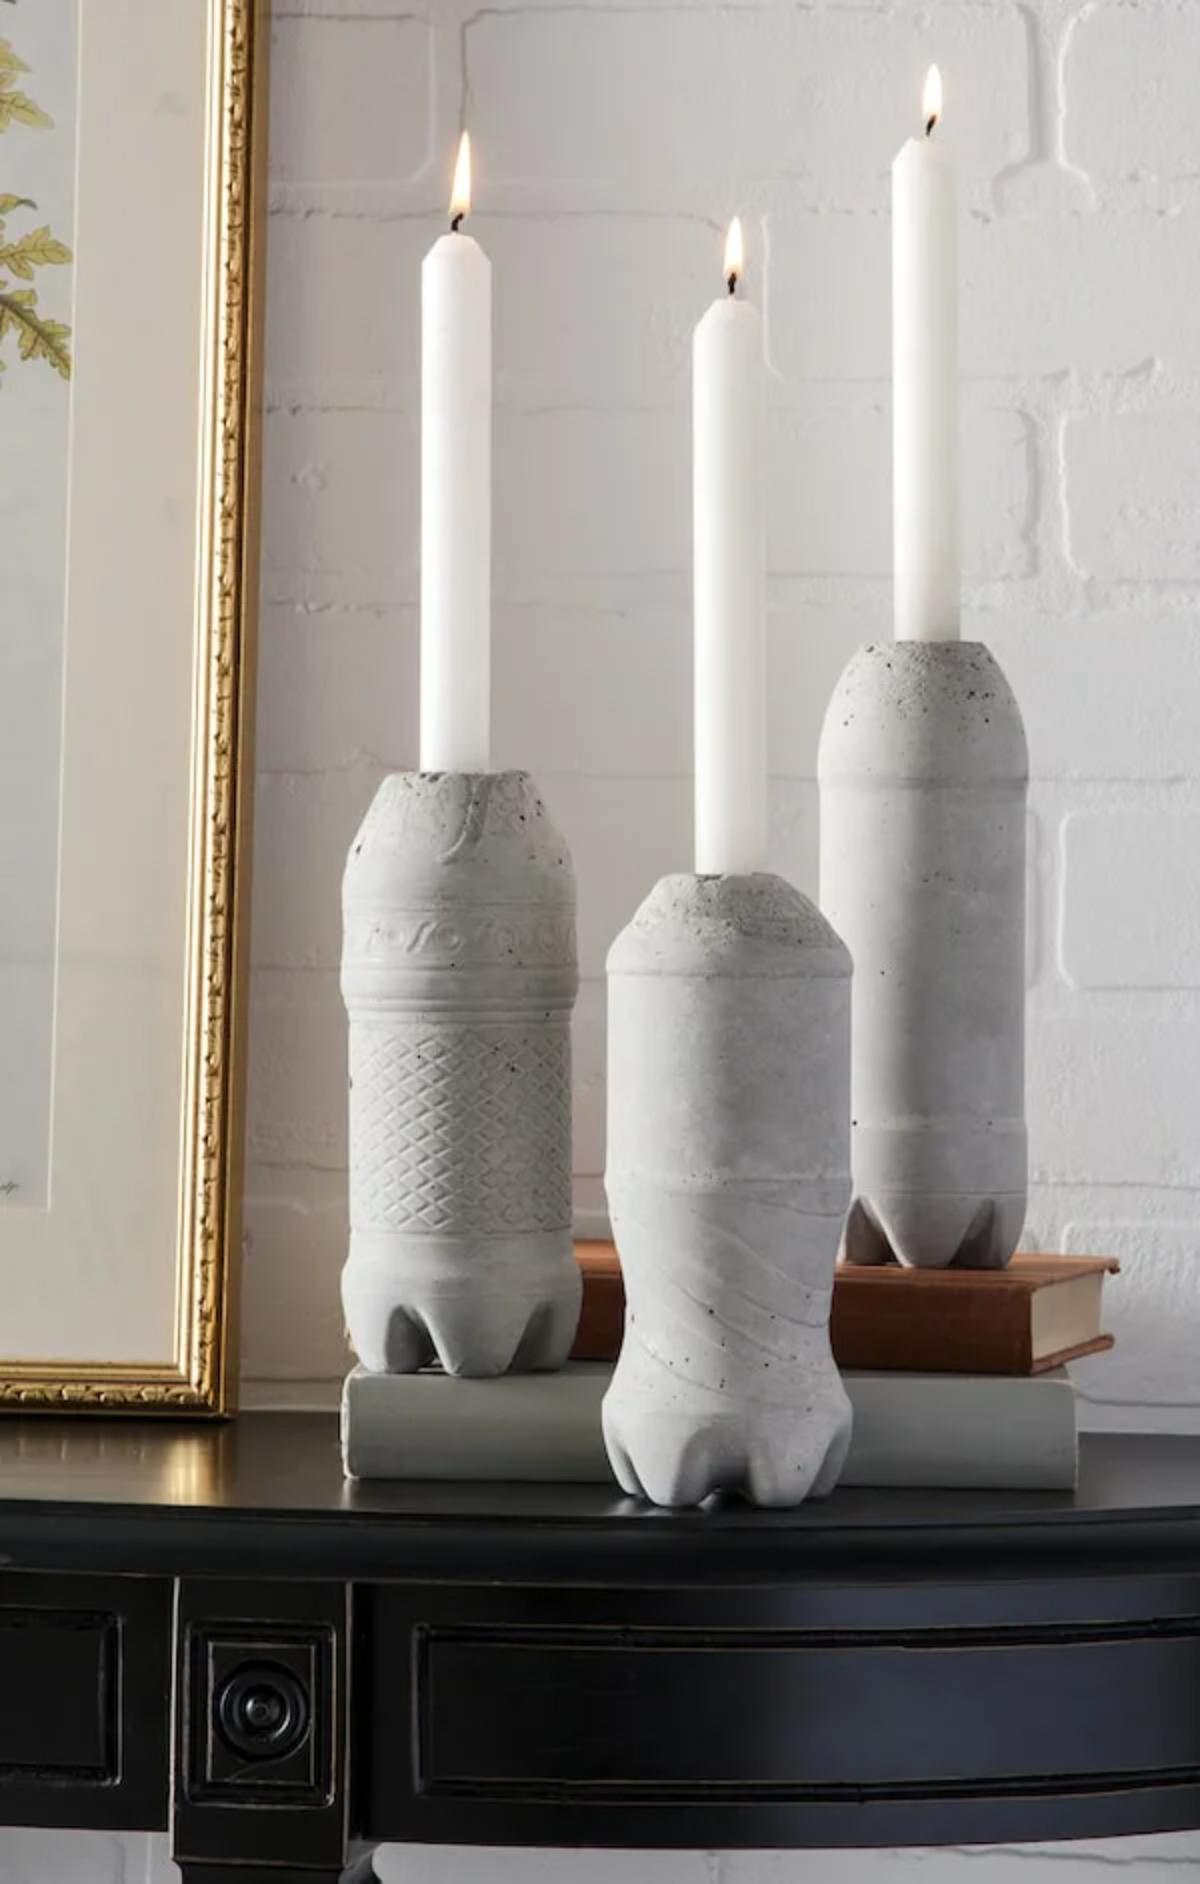 DIY Concrete Candle Holders From Plastic Bottles